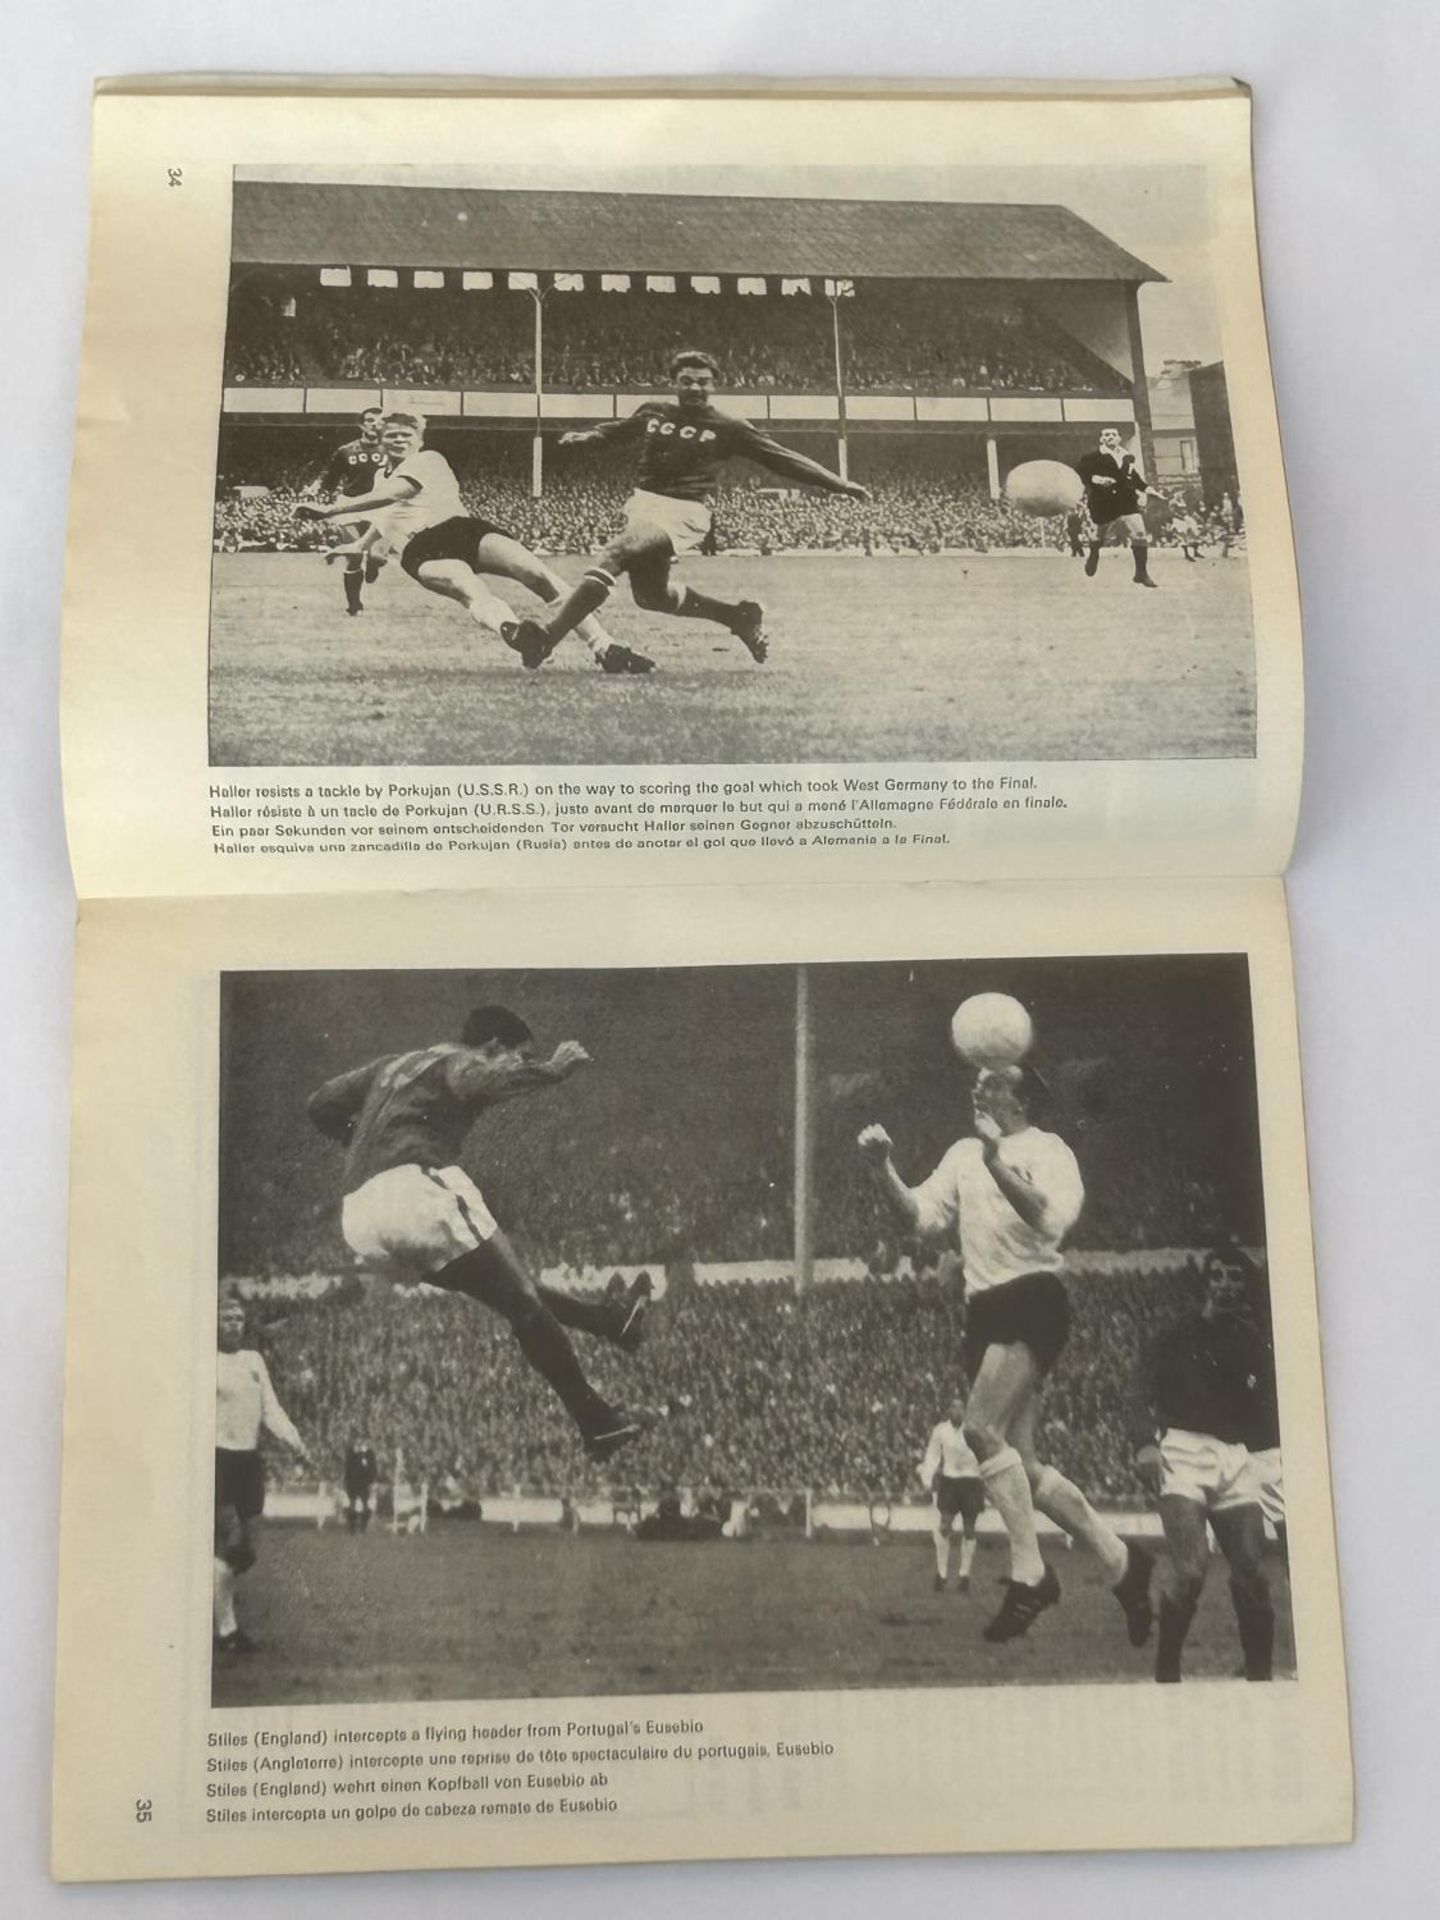 AN OFFICAL 1966 JULES RIMET WORLD CUP FINAL PROGRAMME, ENGLAND V WEST GERMANY, SATURDAY JULY 30TH - Image 4 of 4